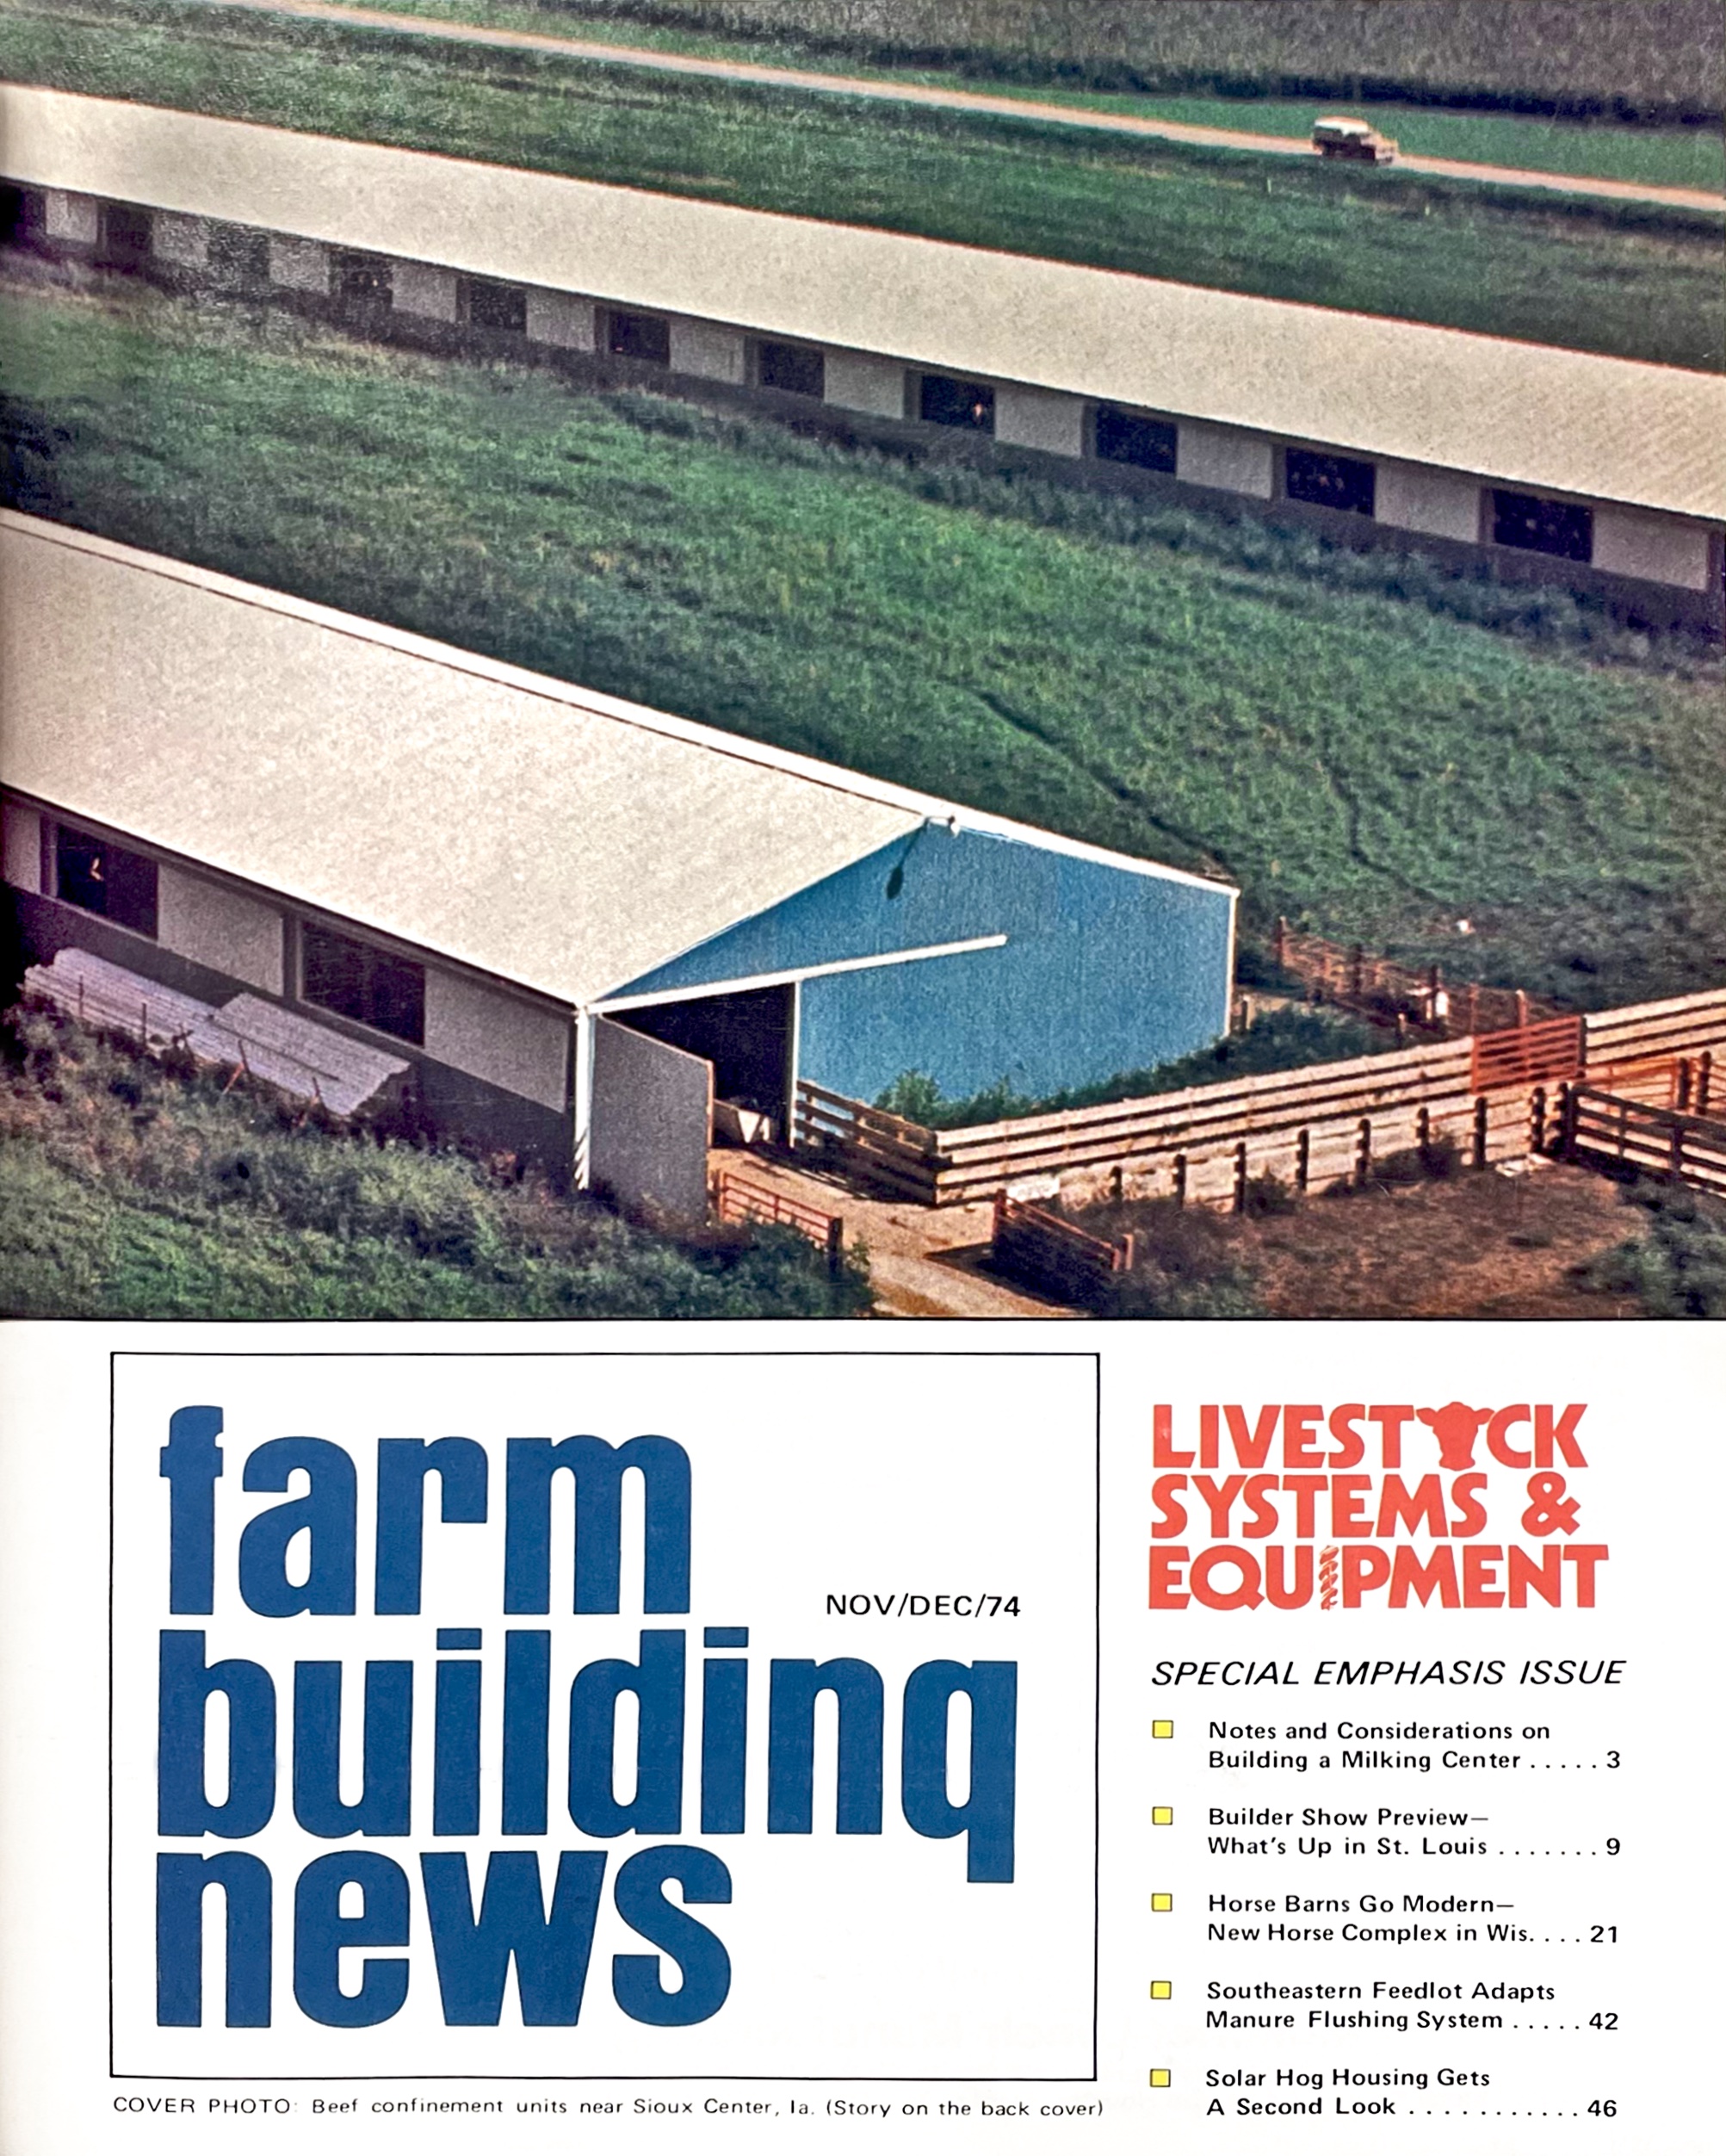 Flashback: Building Design is Key to Good Ranch Management